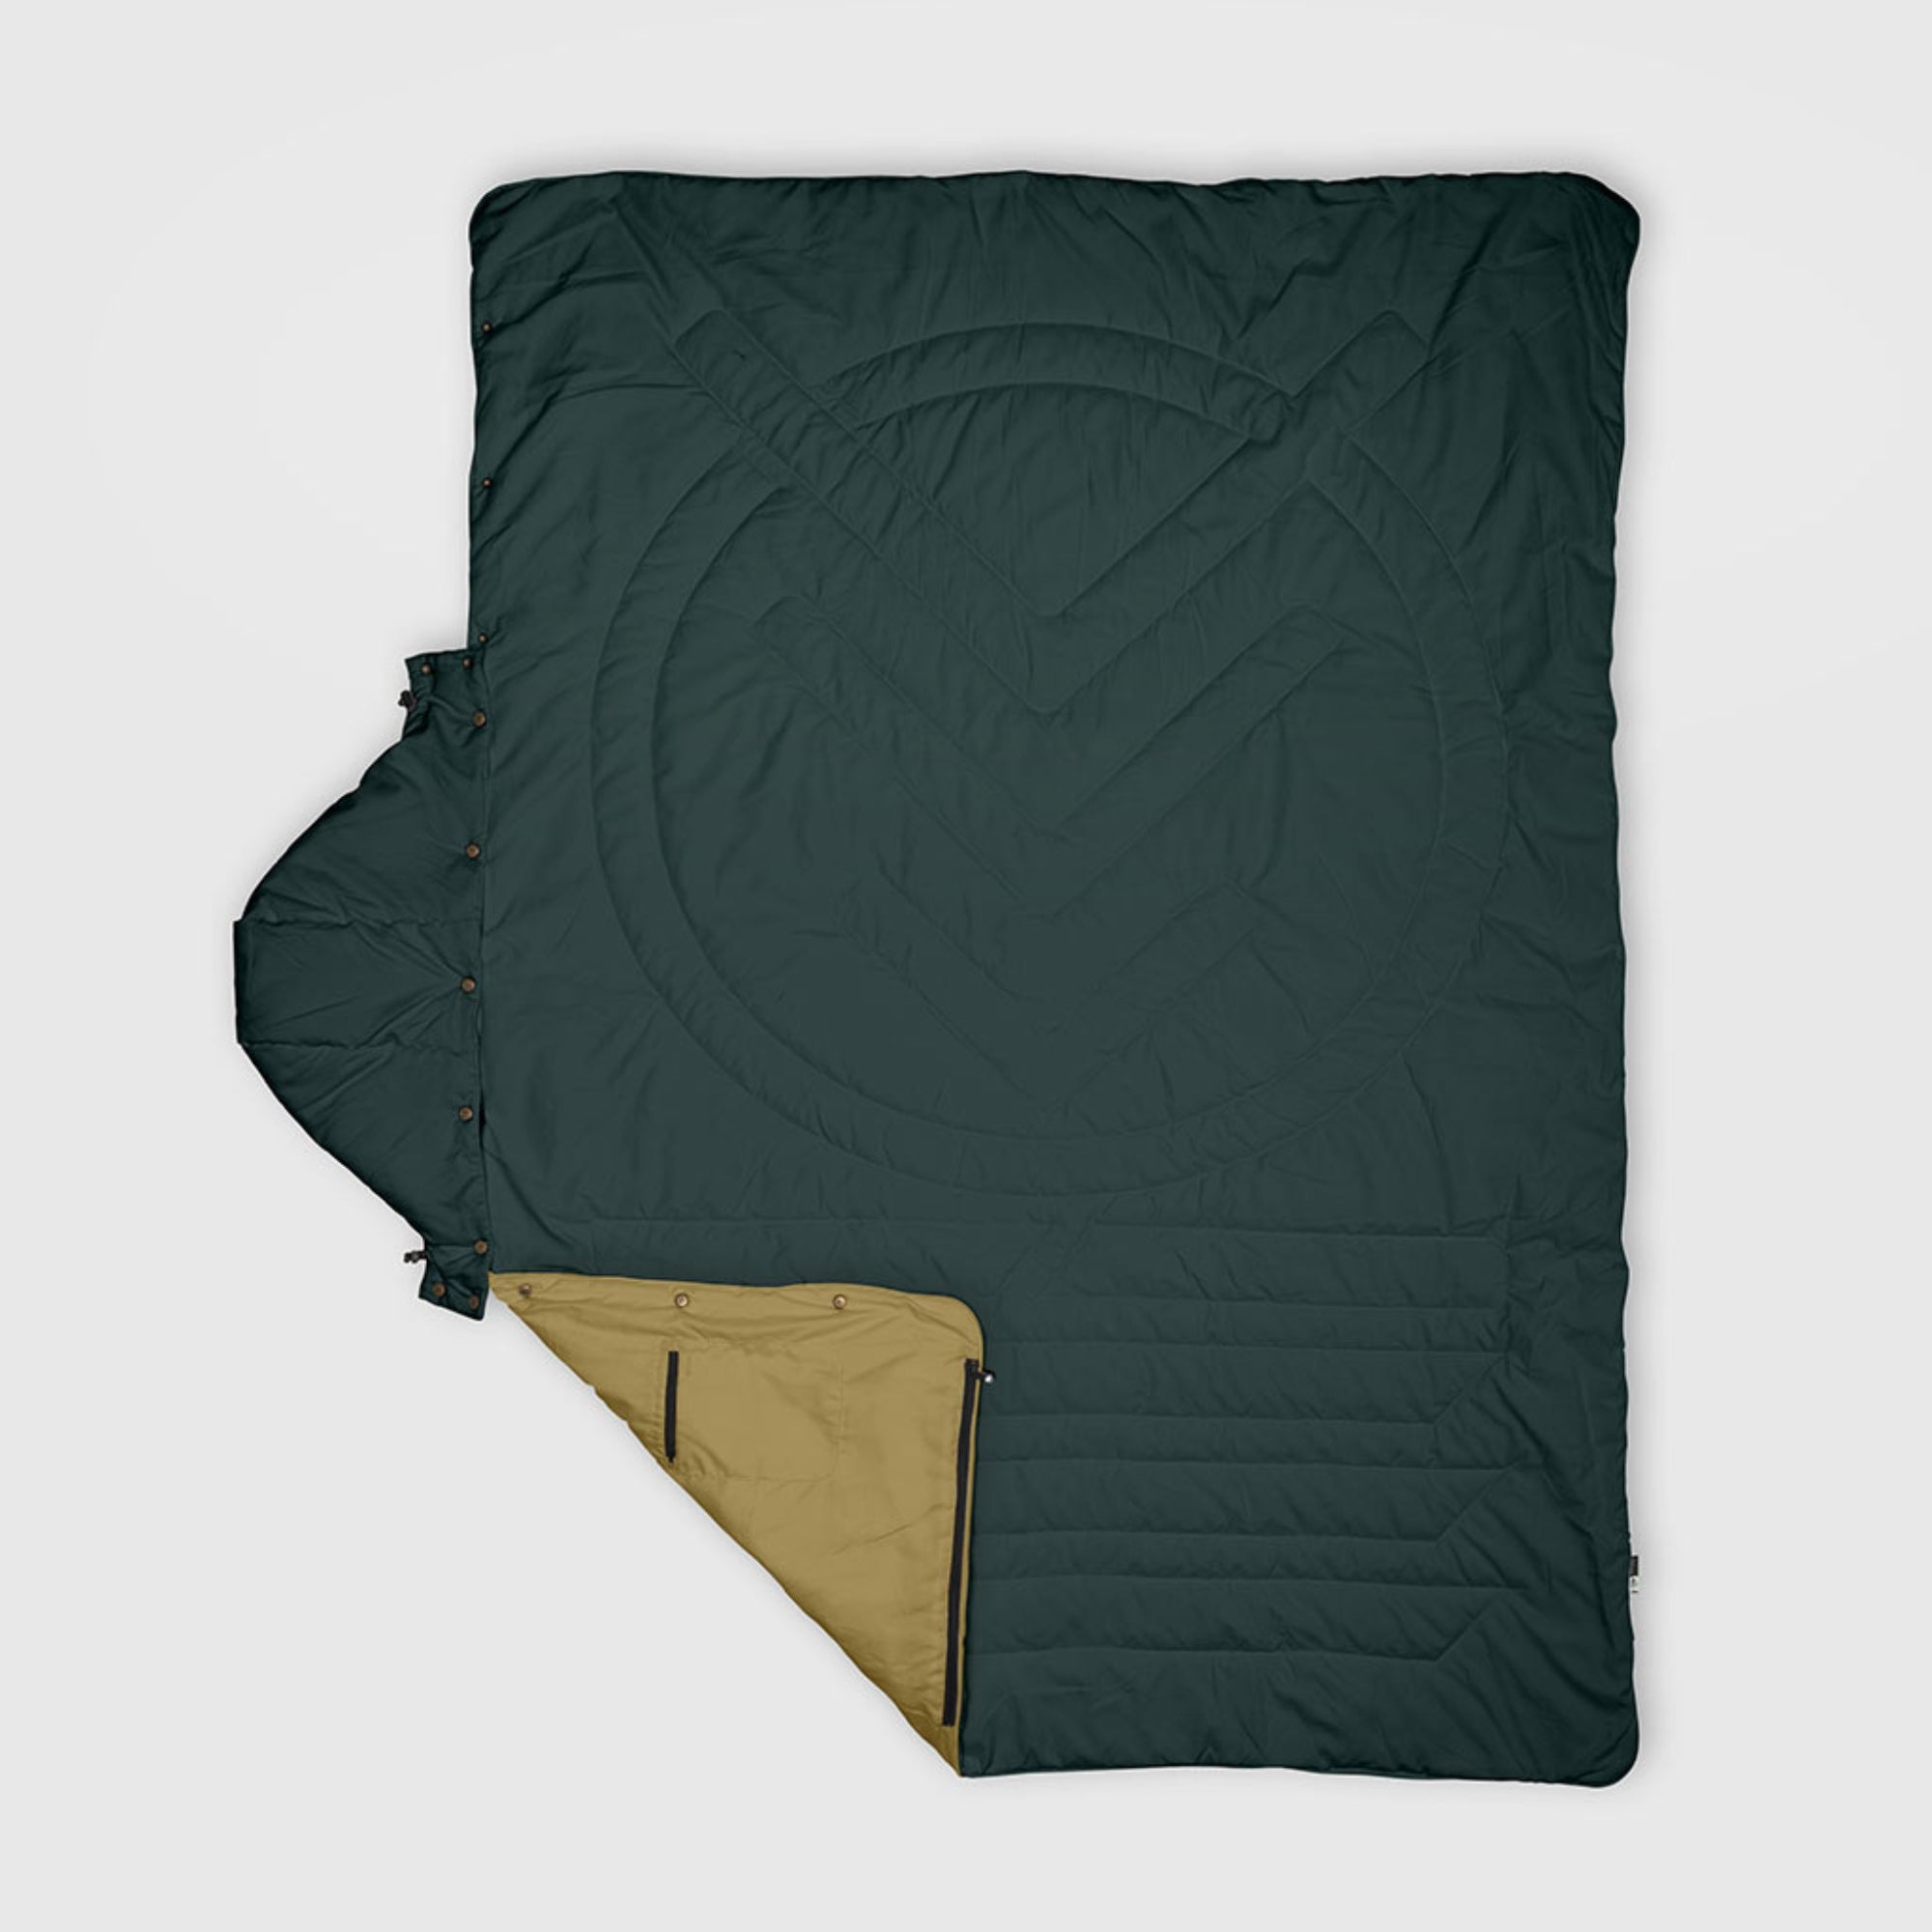 An Tracks ripstop duvet cover | Voited - Outlet